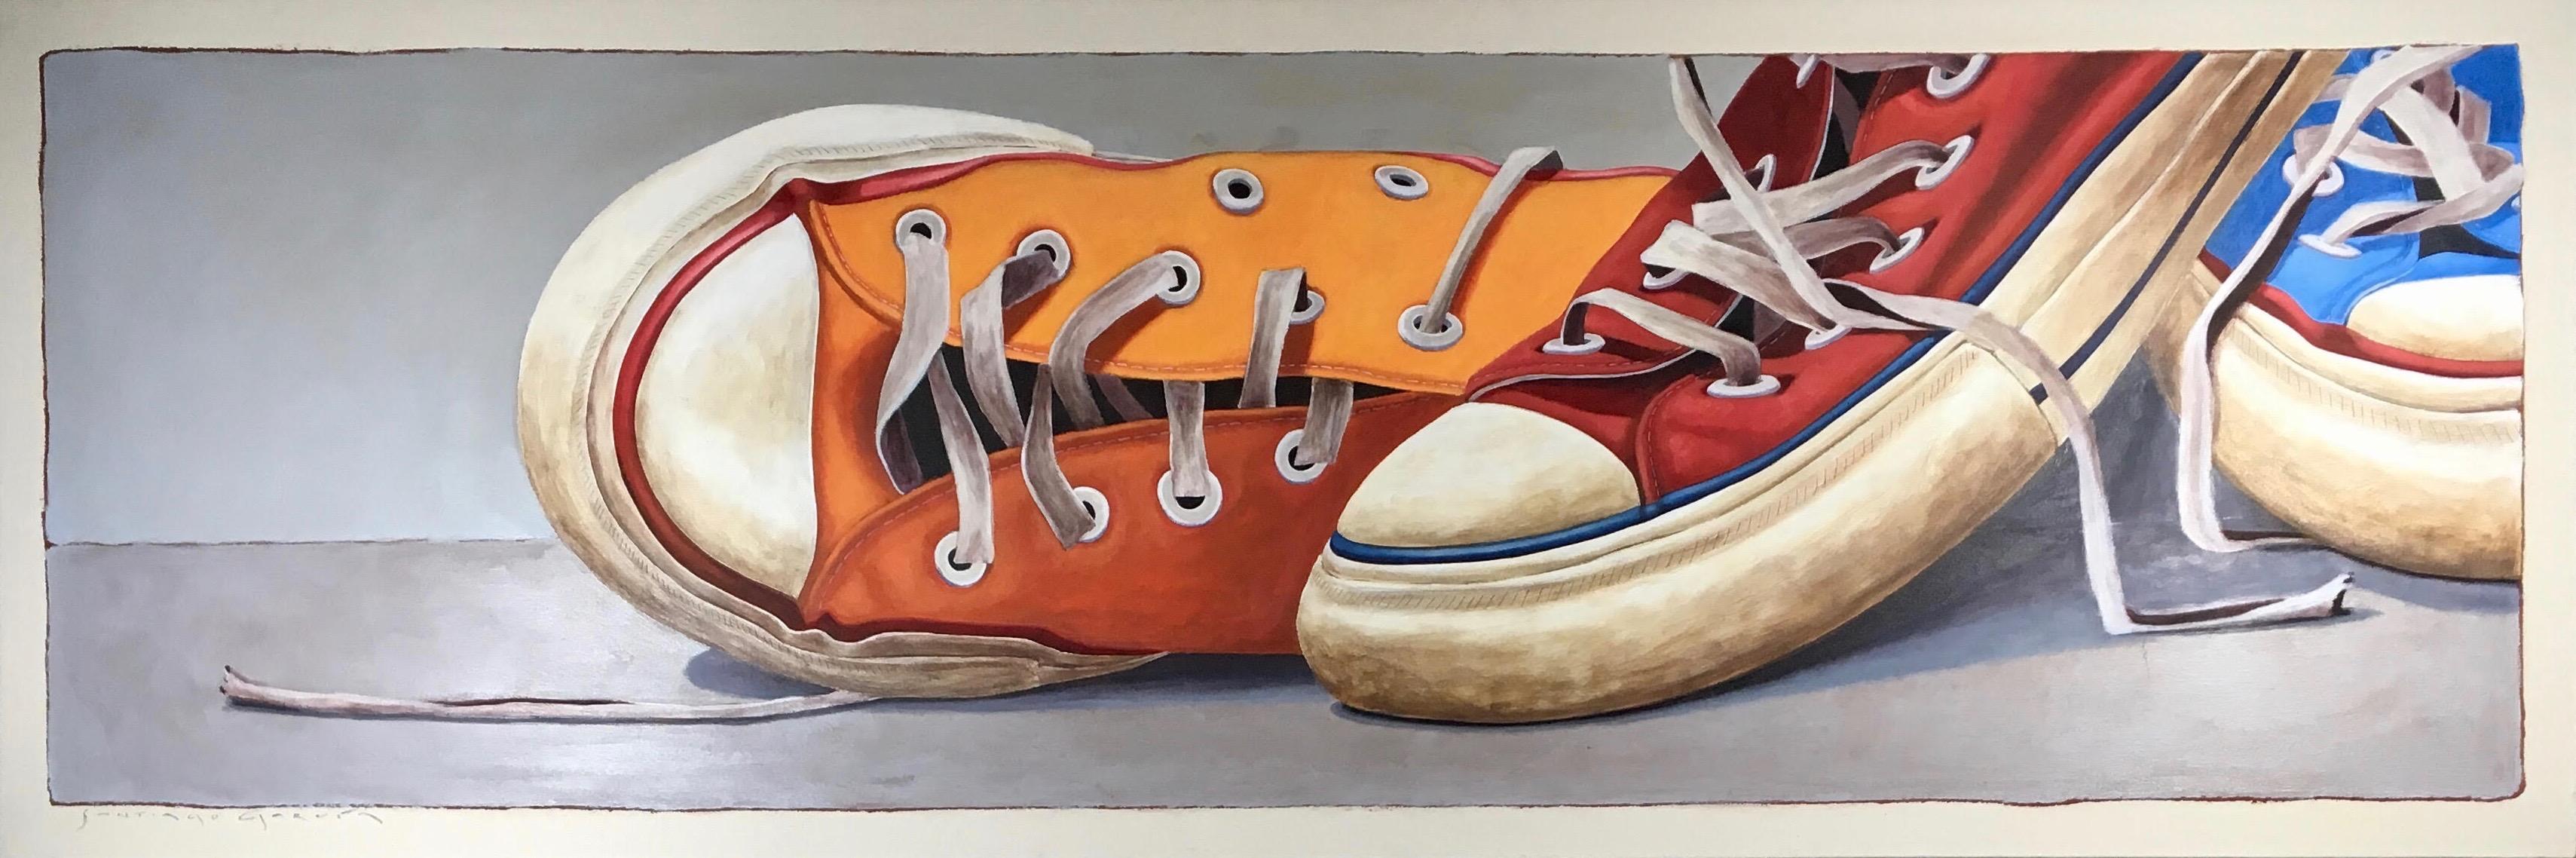 Santiago Garcia Still-Life Painting - "Converse #3" Oil painting of three converse sneakers in orange, red and blue